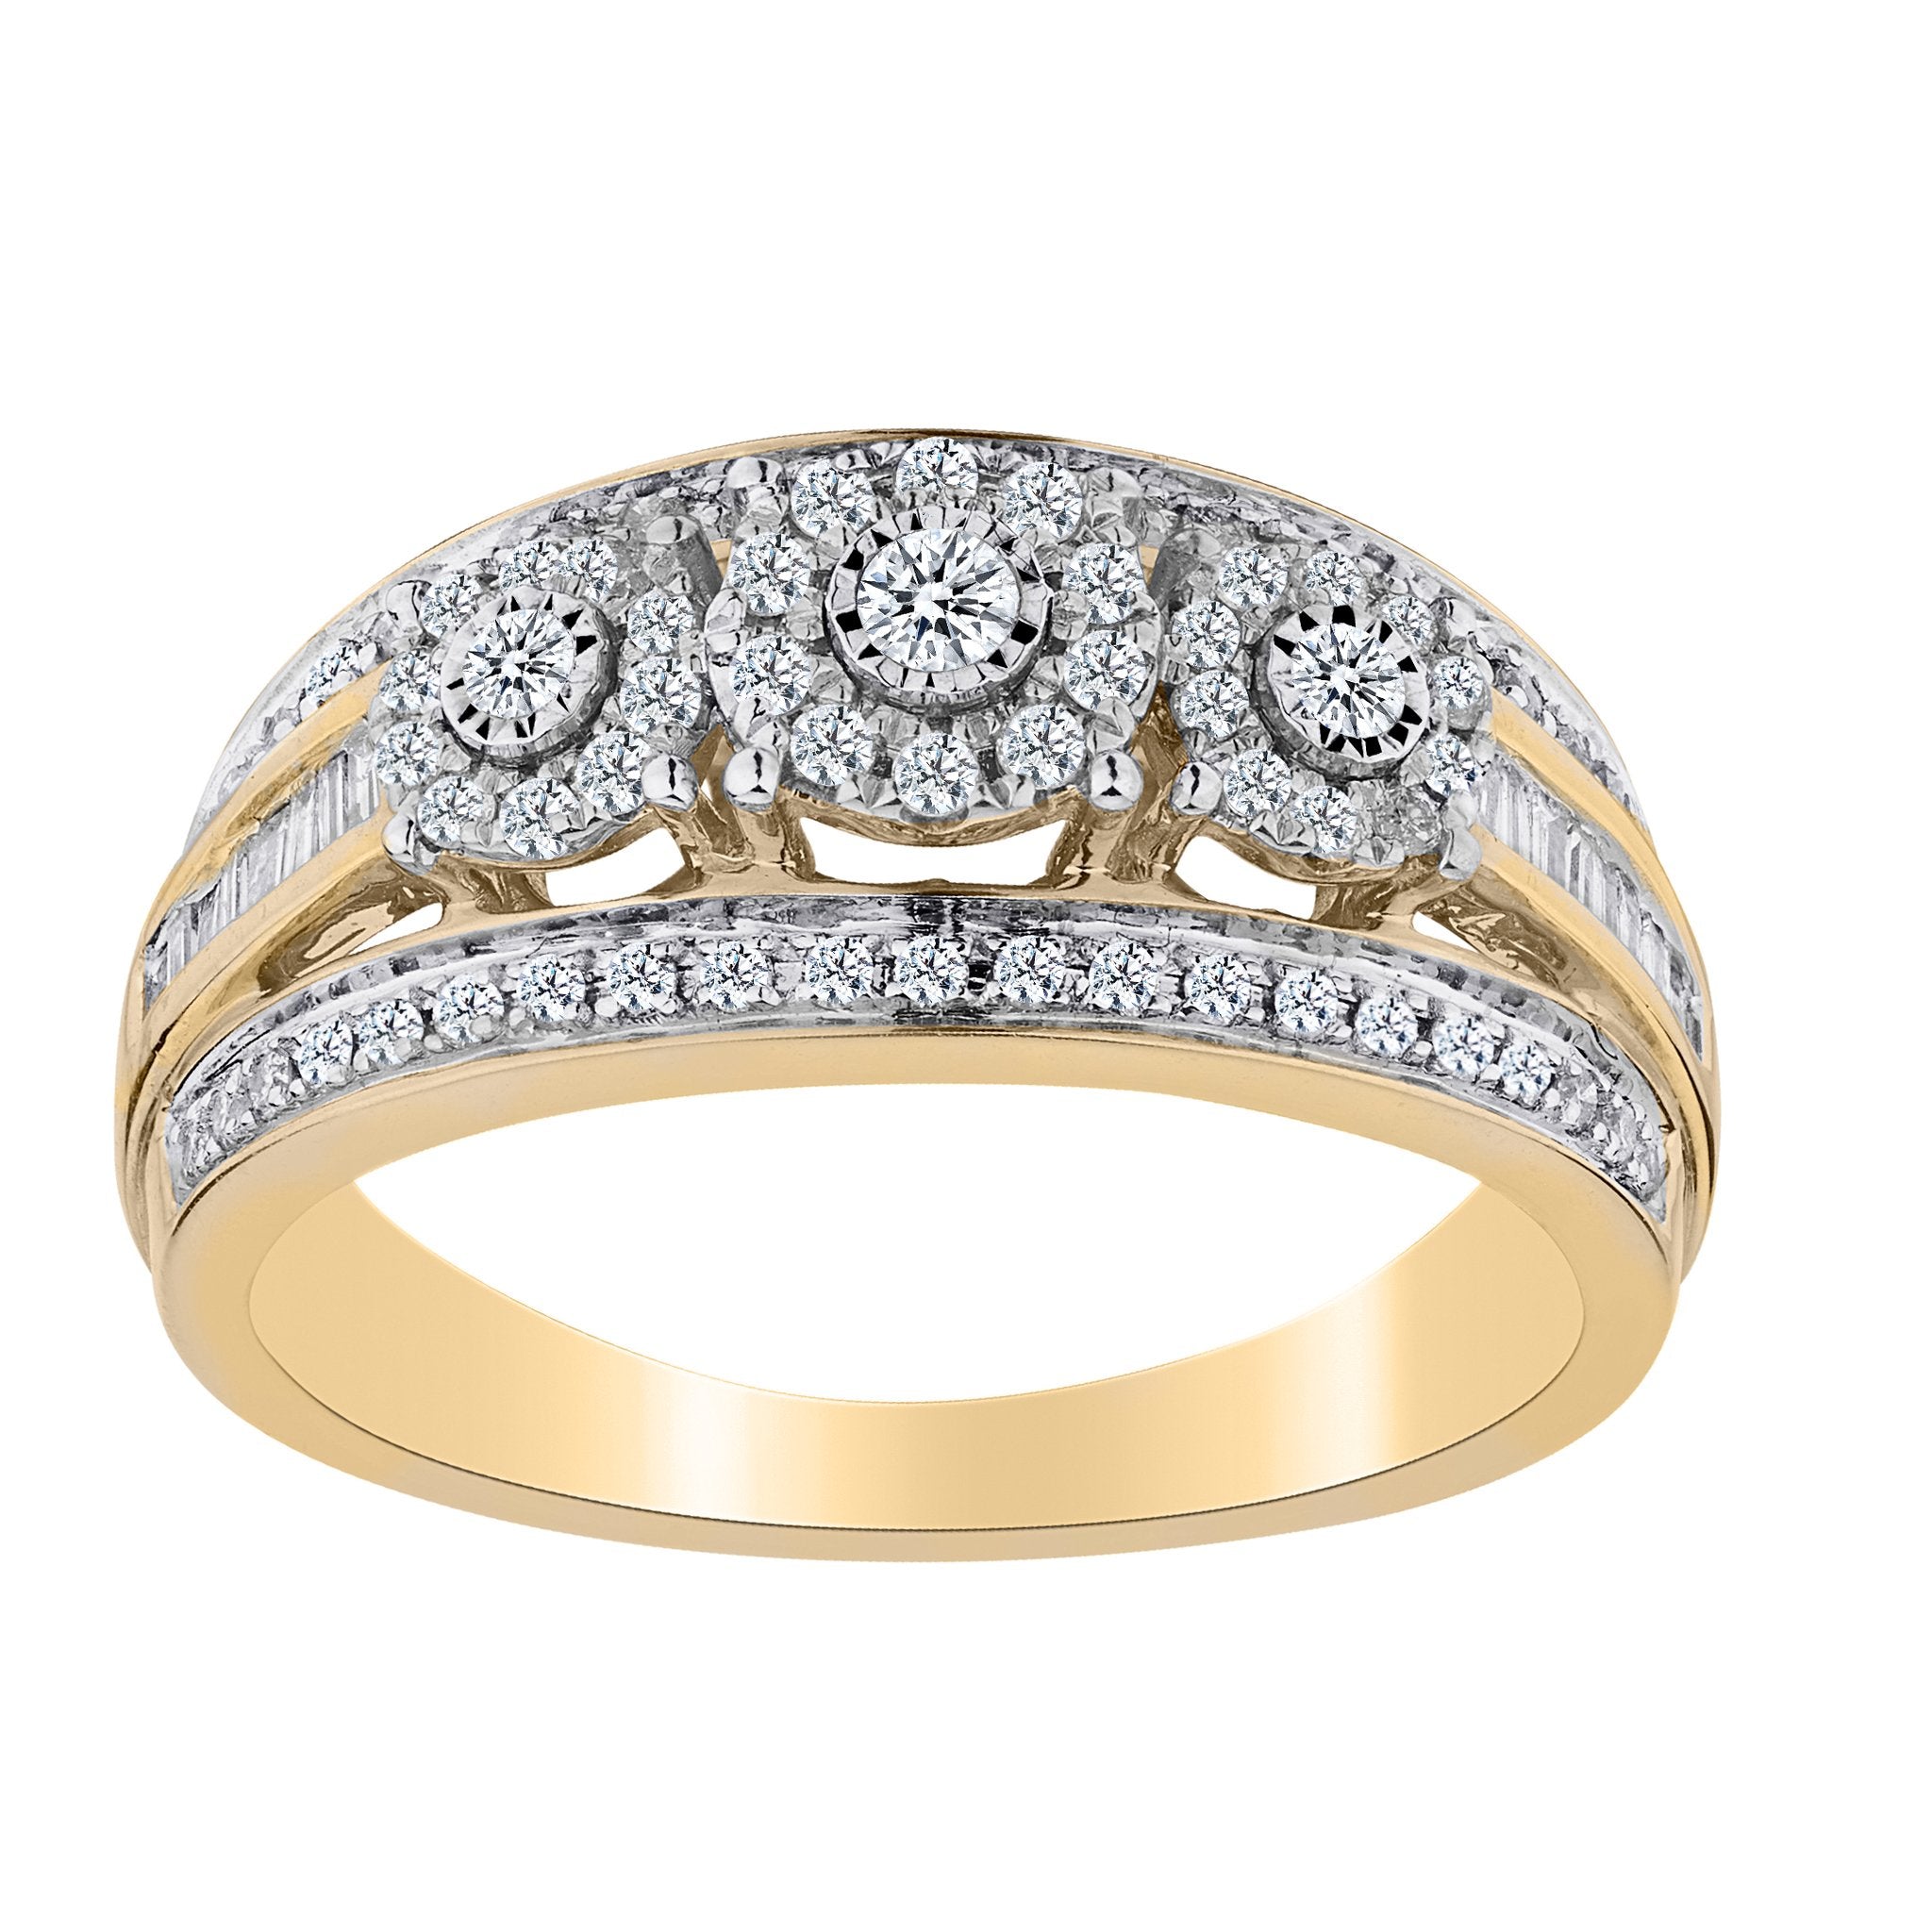 .50 Carat "Past, Present, Future" Diamond Ring, 10kt Yellow Gold. Fashion Rings - Griffin Jewellery Designs